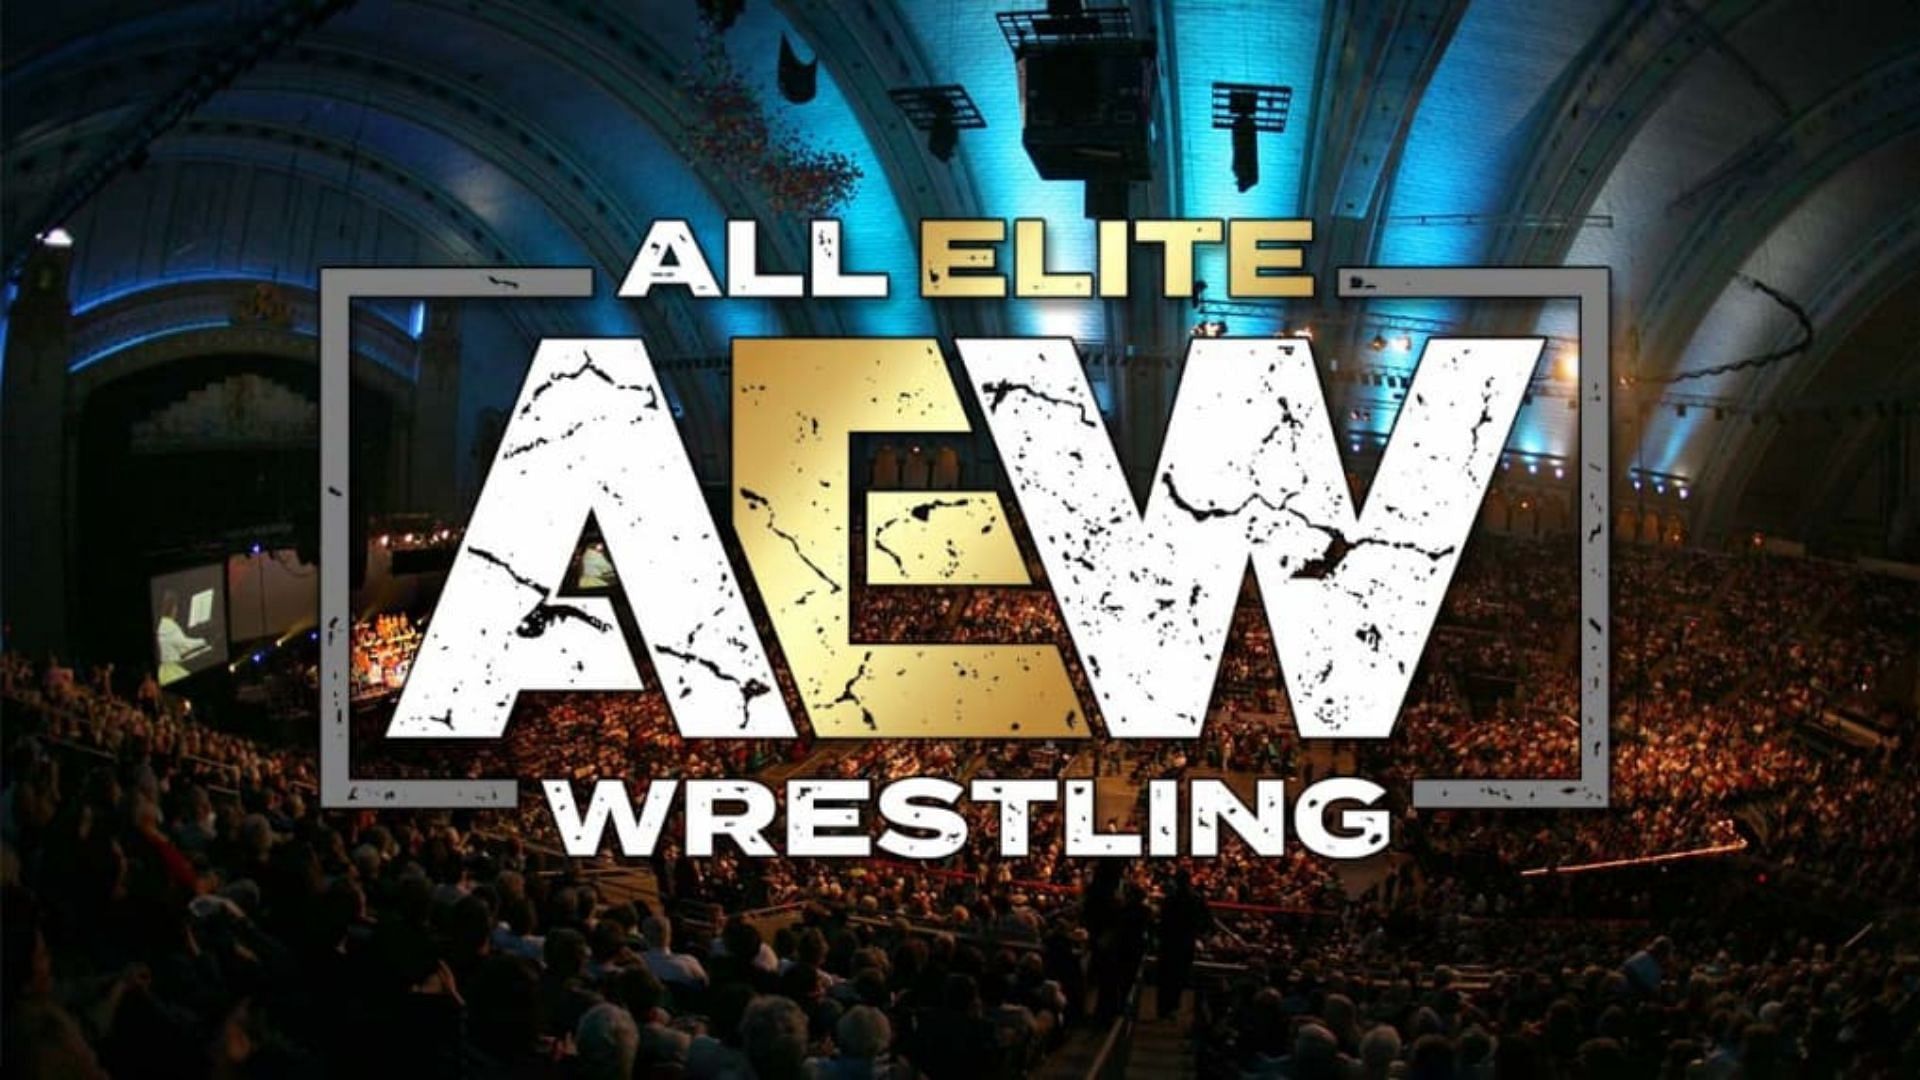 AEW is a Jacksonville-based promotion led by Tony Khan